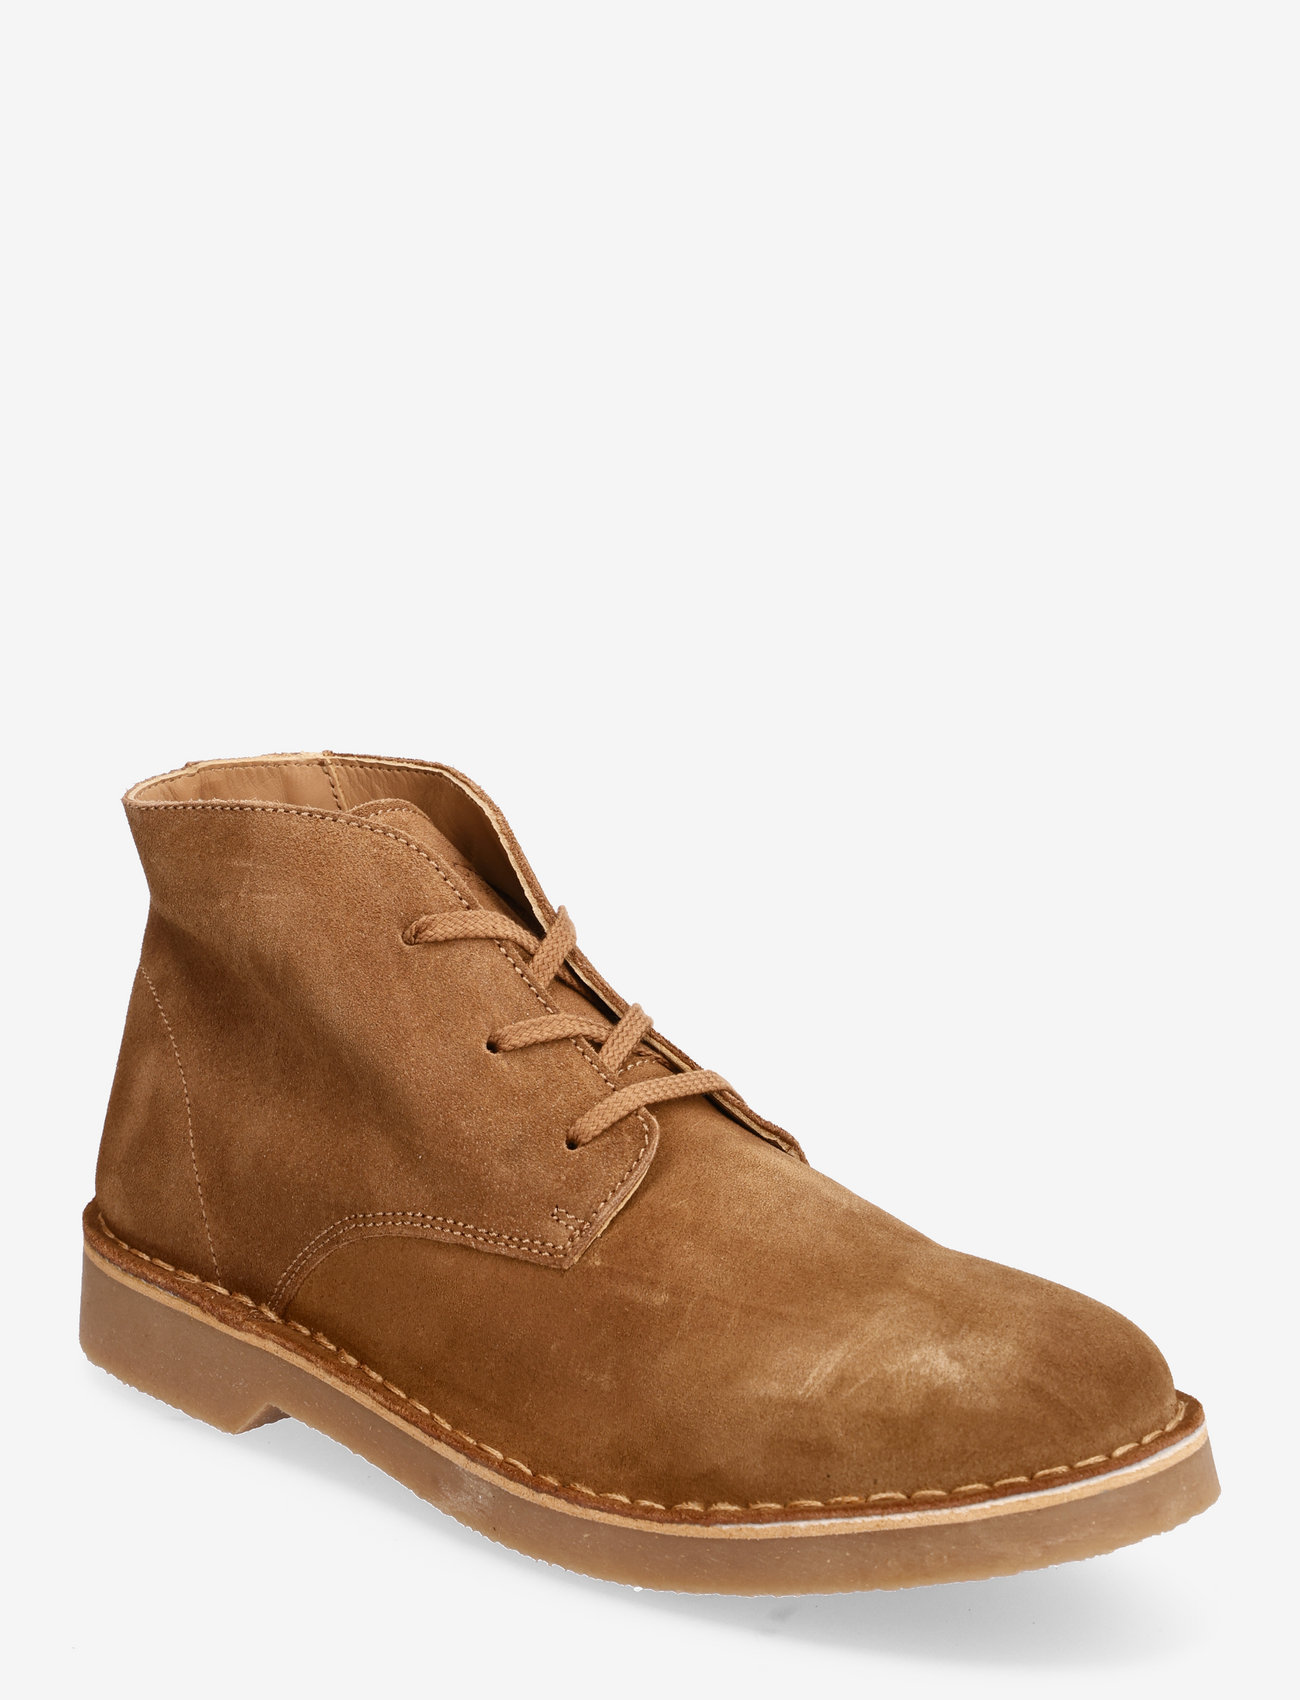 Selected Homme - SLHRIGA NEW SUEDE CHUKKA BOOT B - desert boots - tobacco brown - 0